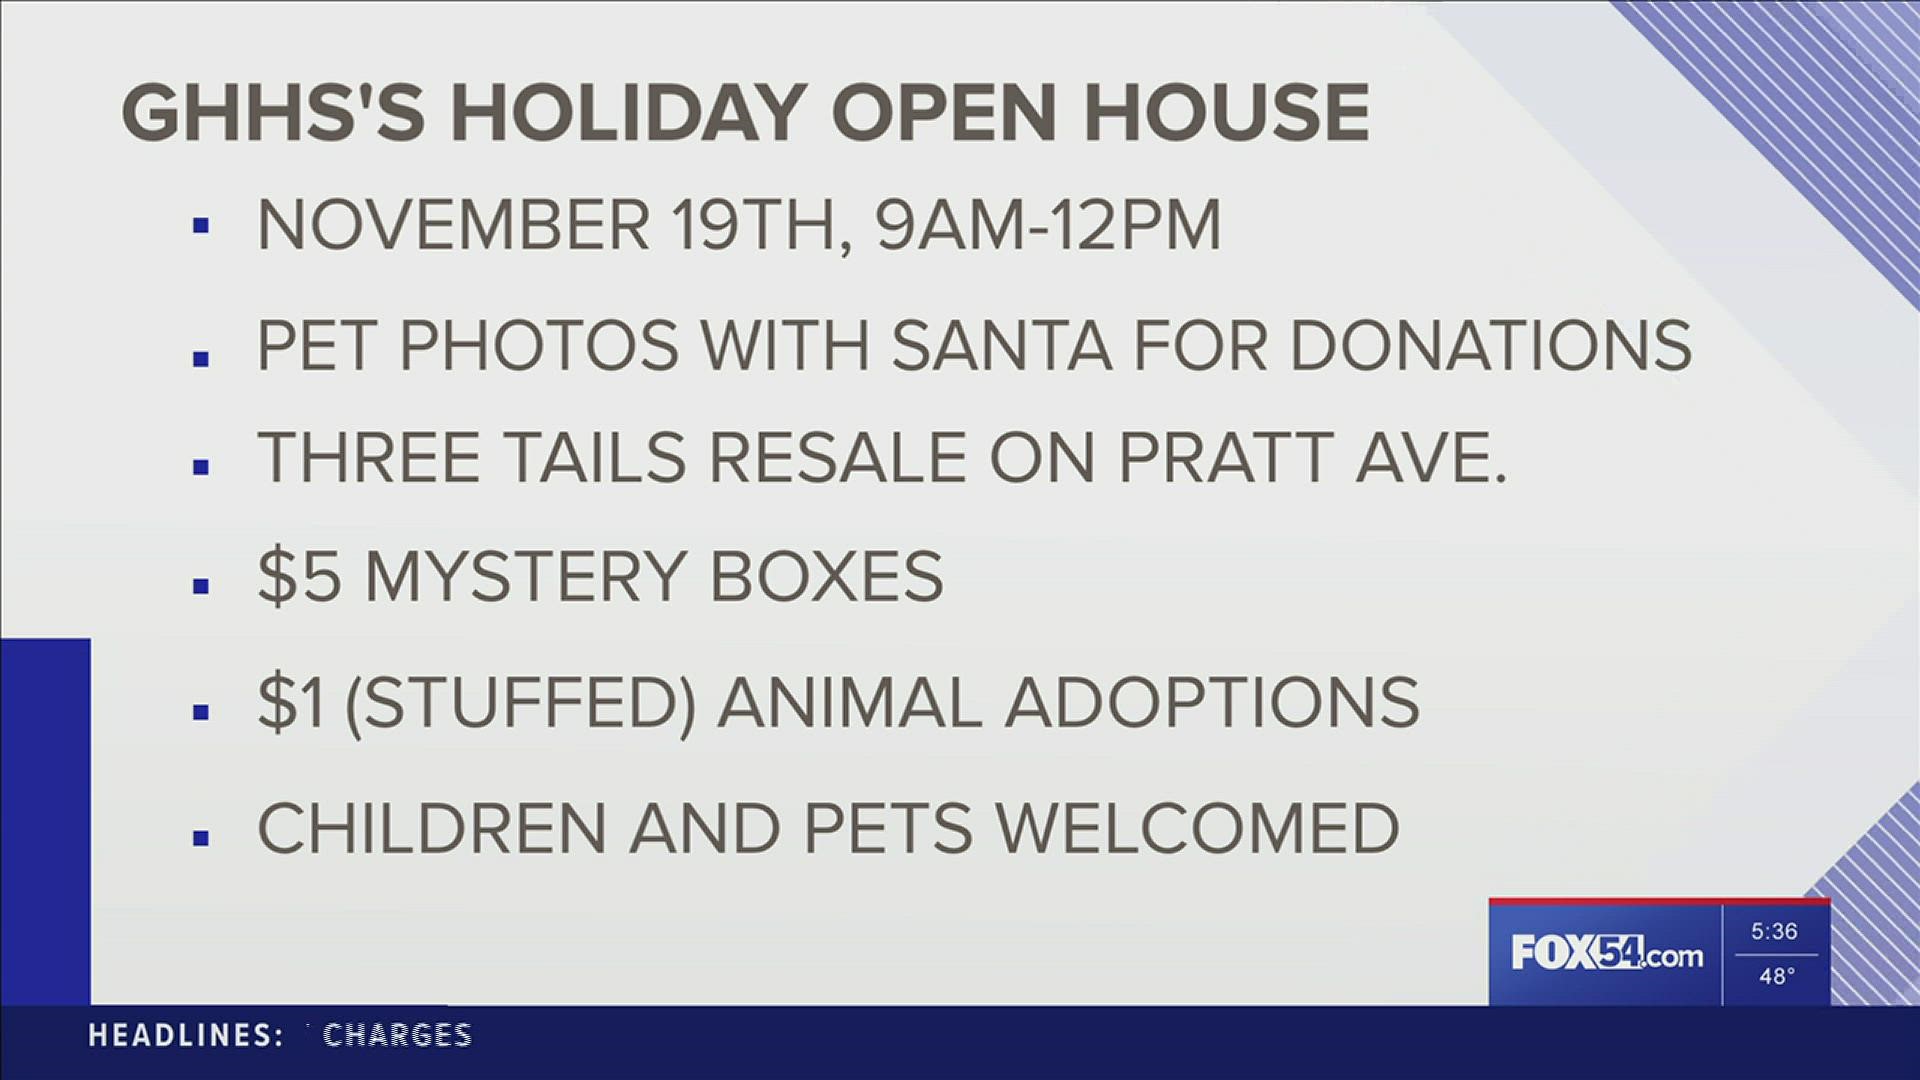 Though Santa loves the kids, he also holds pets close to his heart, as there will be pet photos with Santa for donations to the humane society.